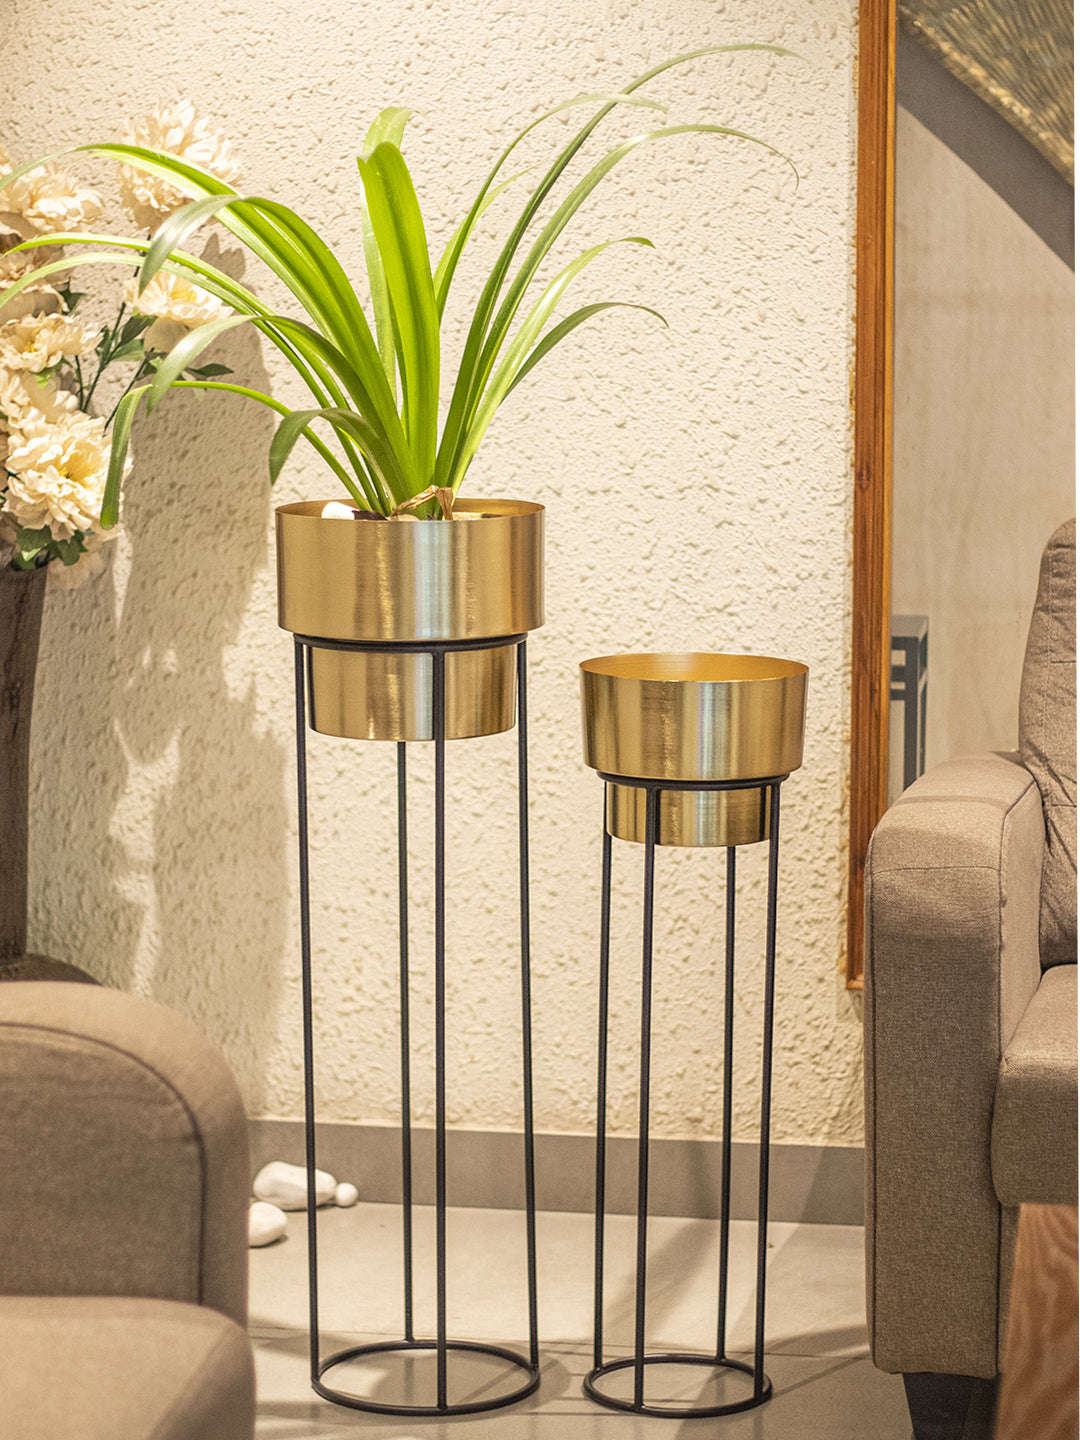 VON CASA Diwali Decoration Item PLANTER STAND LARGE AND SMALL PACK OF 2